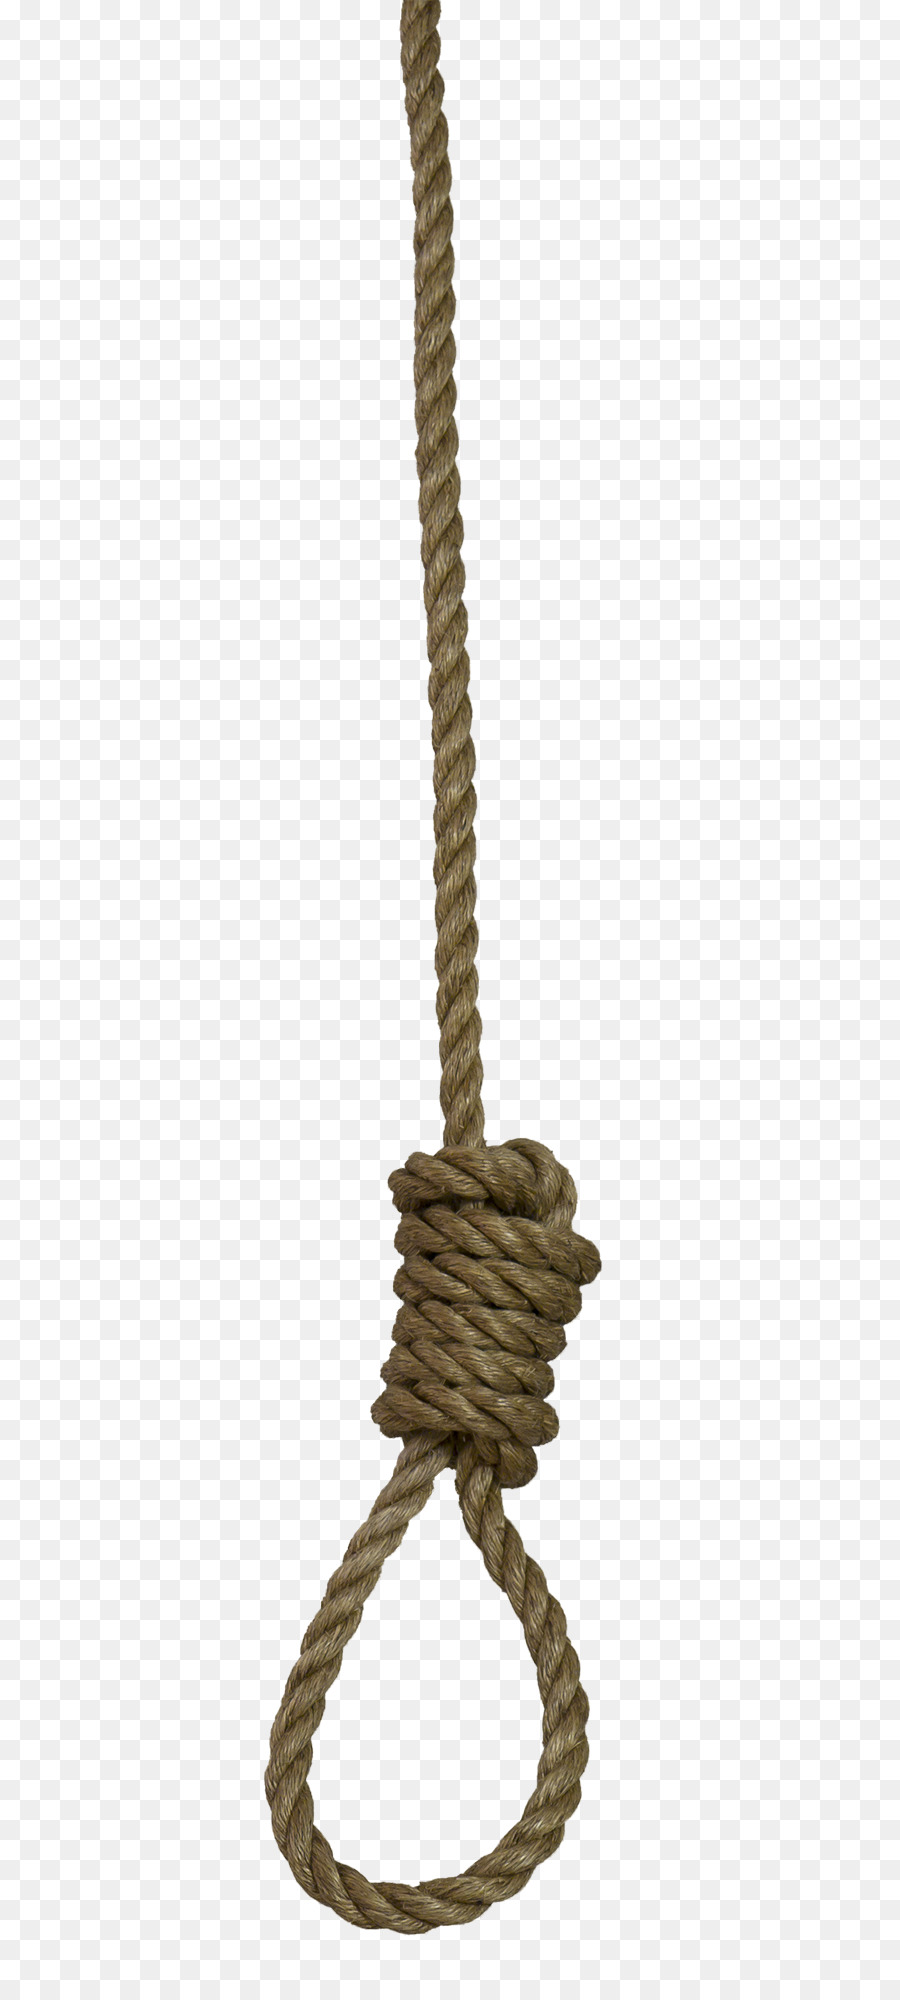 Noose Rope Knot - A rope png download - 697*2000 - Free Transparent Noose png Download.